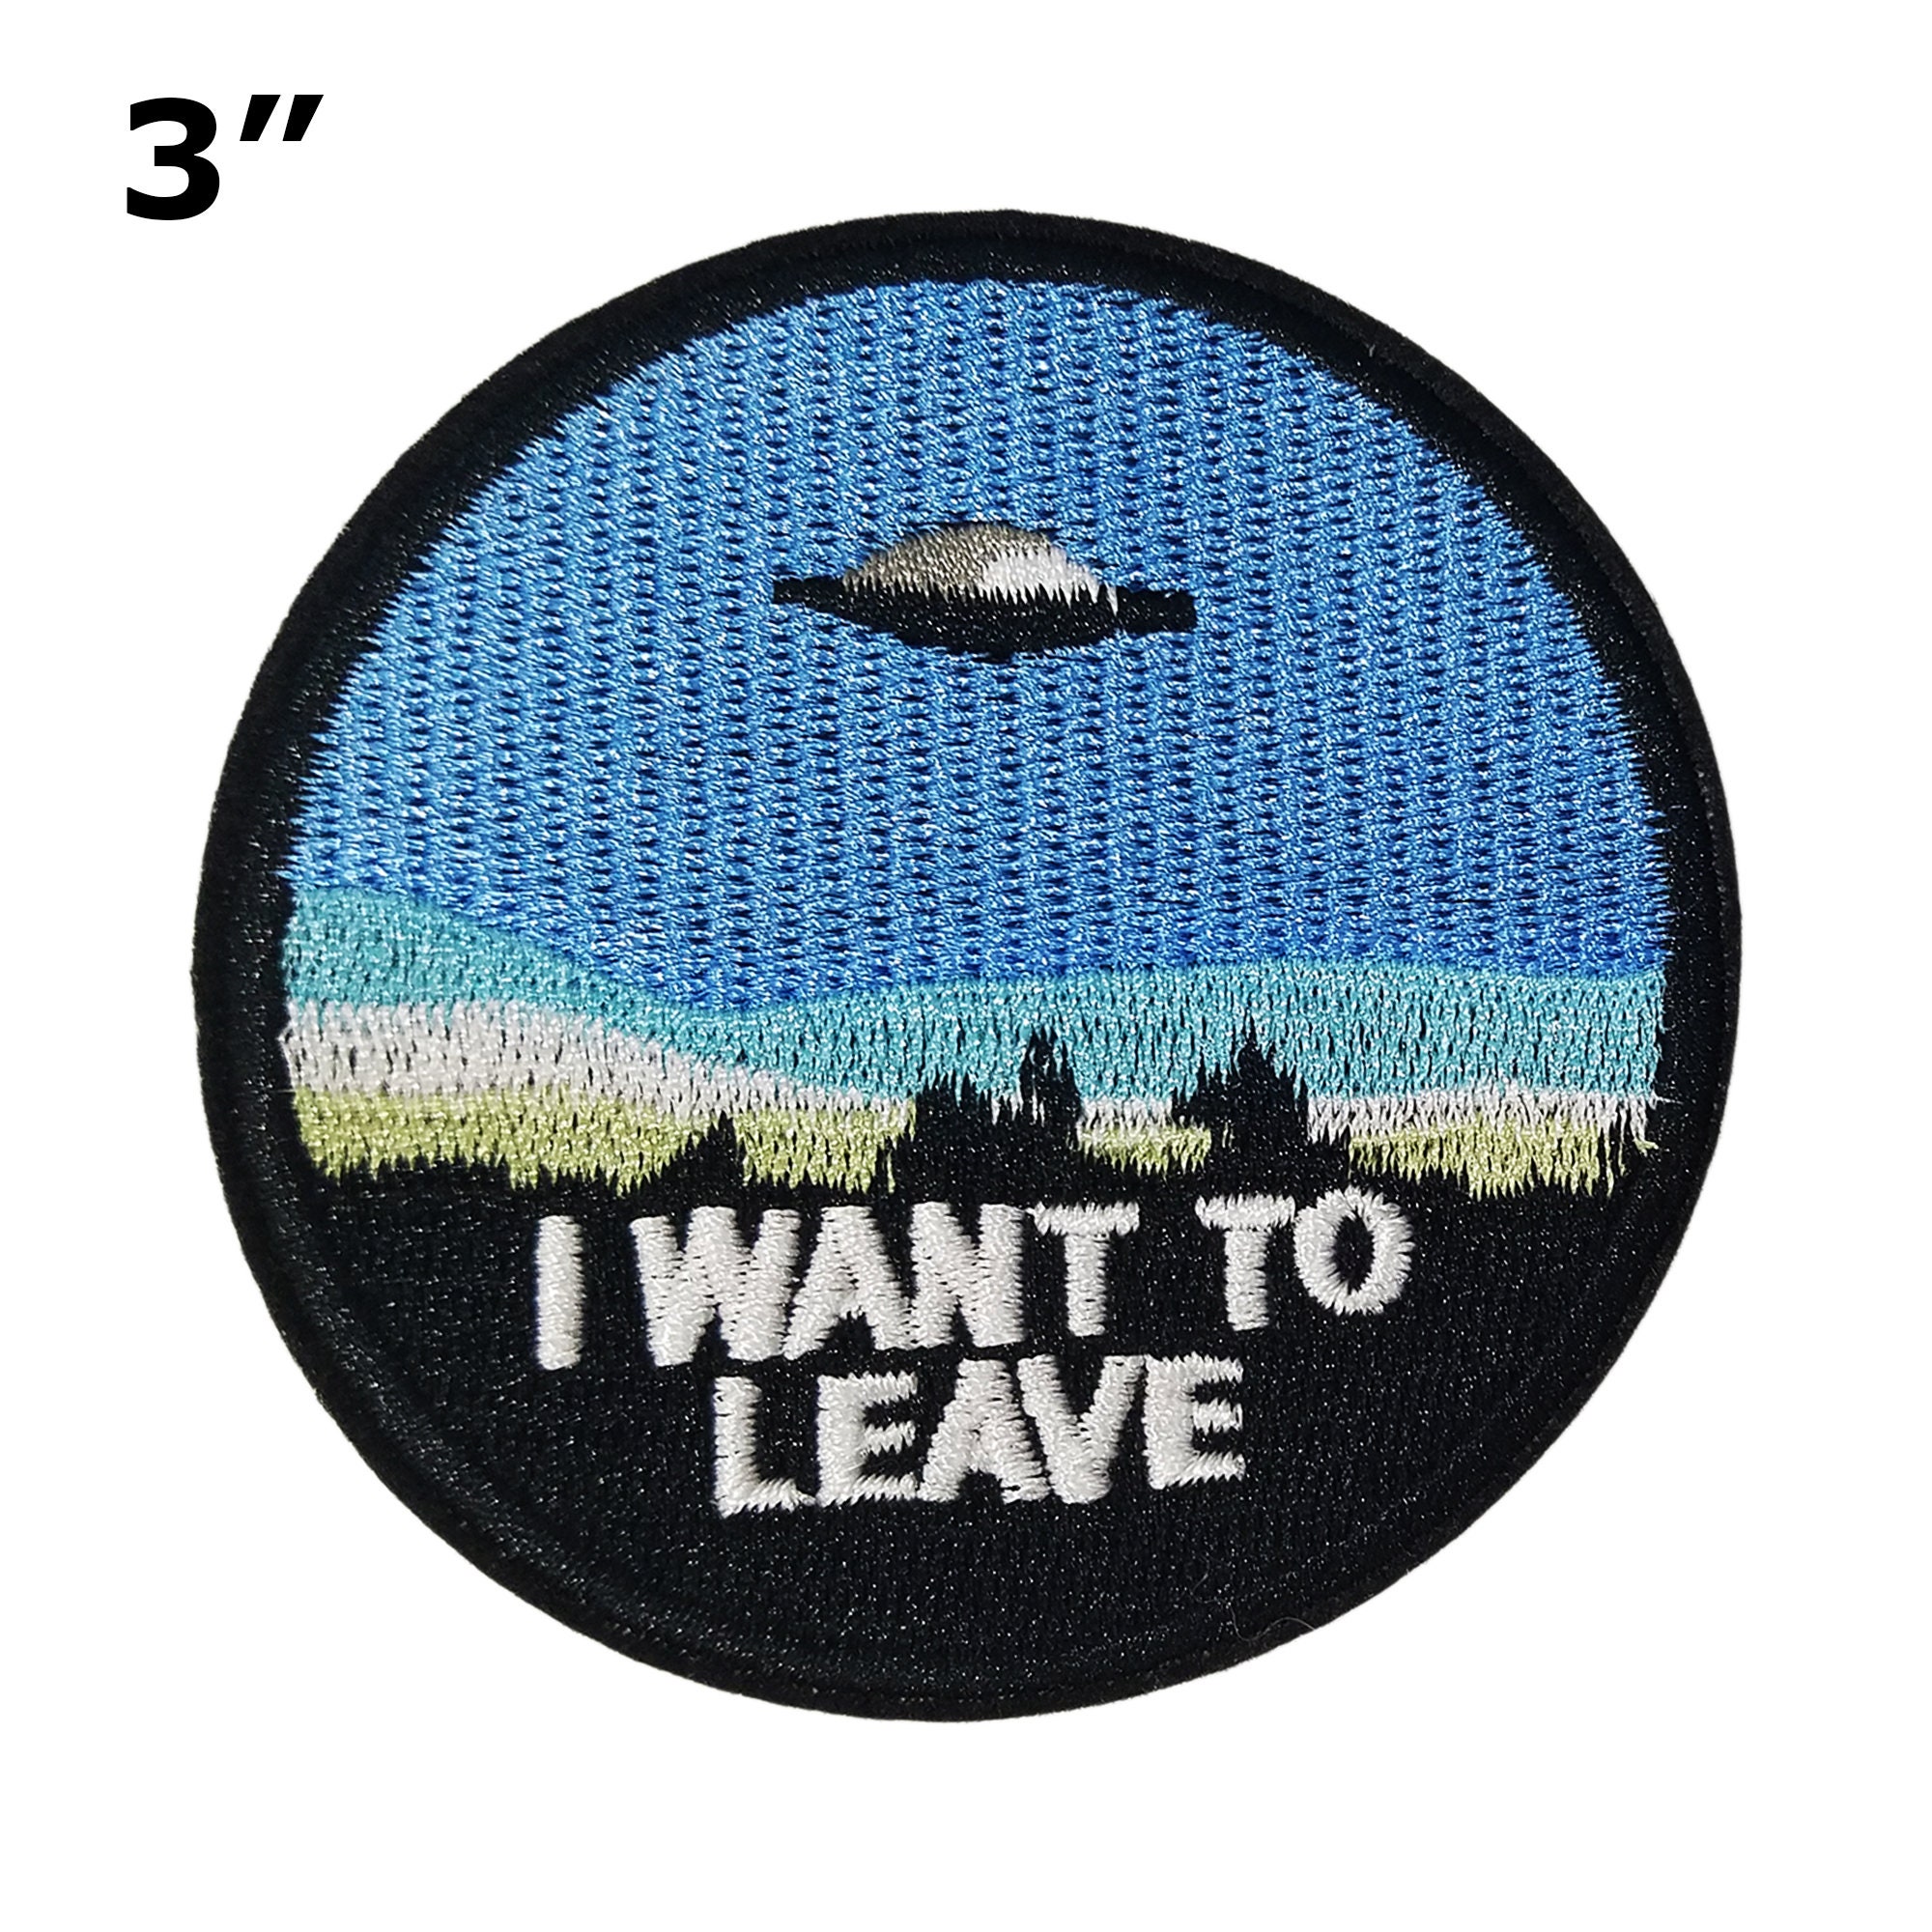 Patches for Jackets Flower Patches Jackets Iron on Patches DnD Patches Punk Patches Patches Custom Patches Sea Style Patch